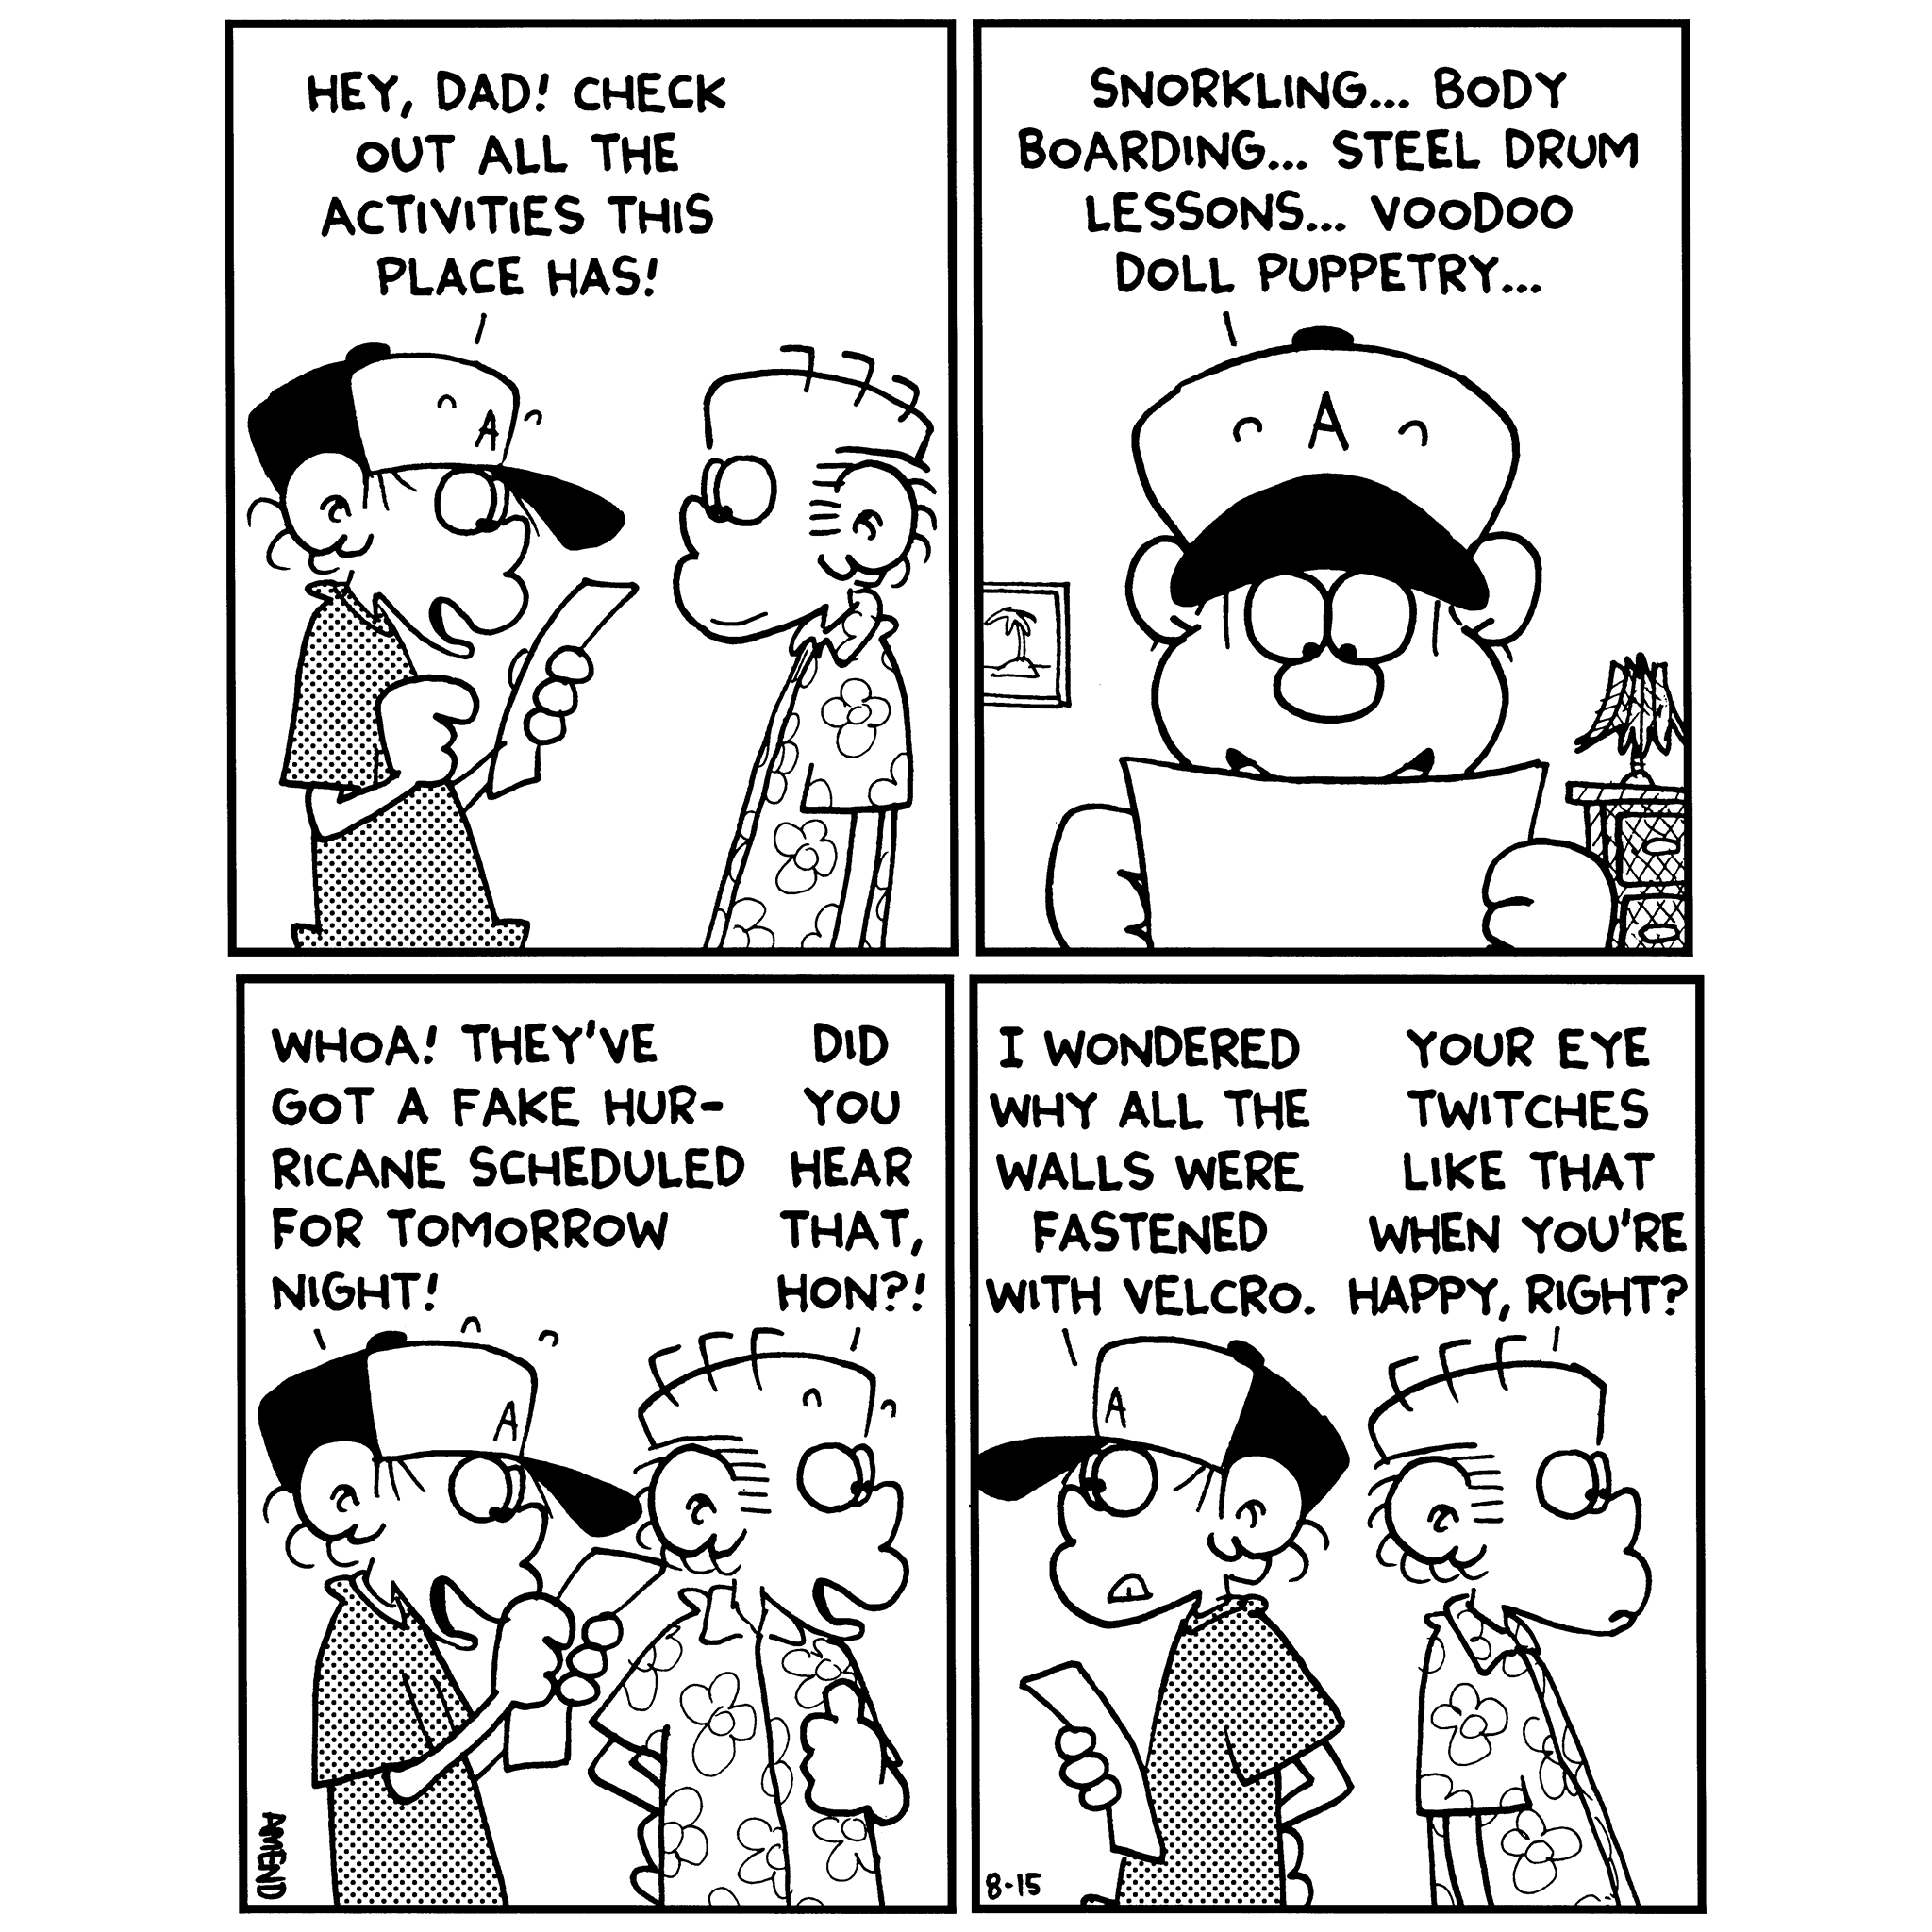 FoxTrot comic strip by Bill Amend - August 14, 2001 - Caribbeanny Vacation